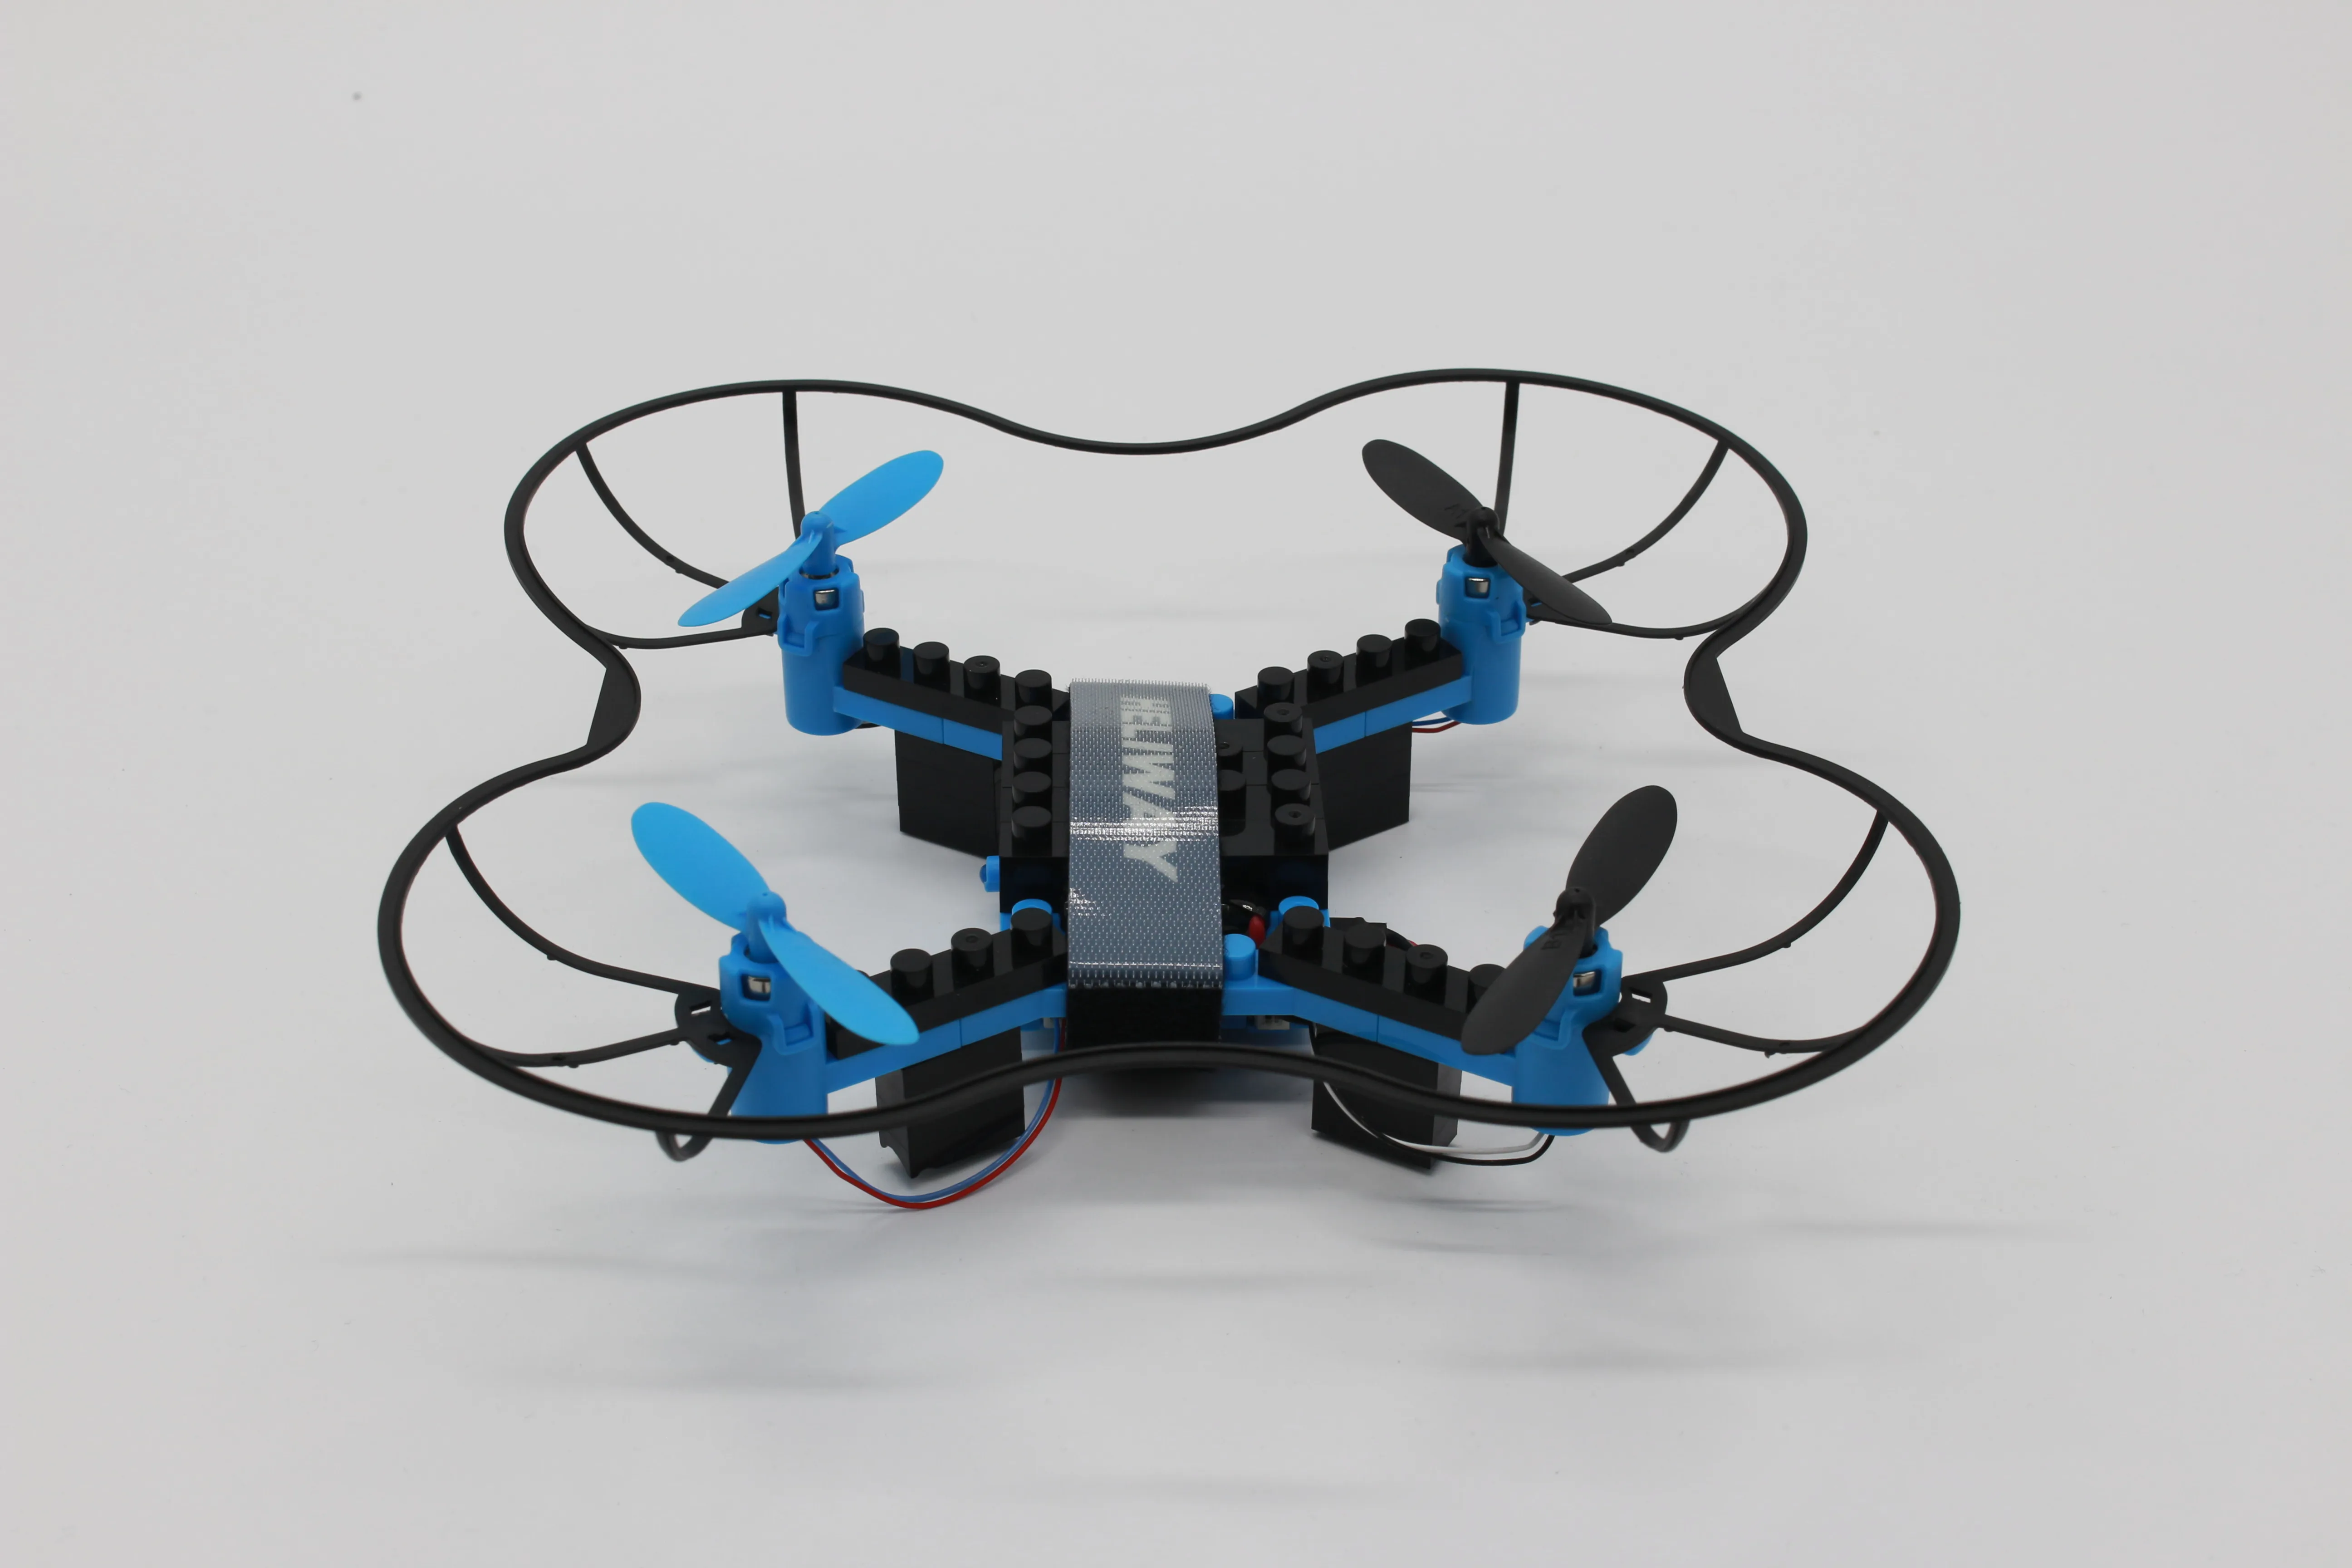 Higher Level Interaction Rc Building Blocks Toy Drone By Diy Firmly ...